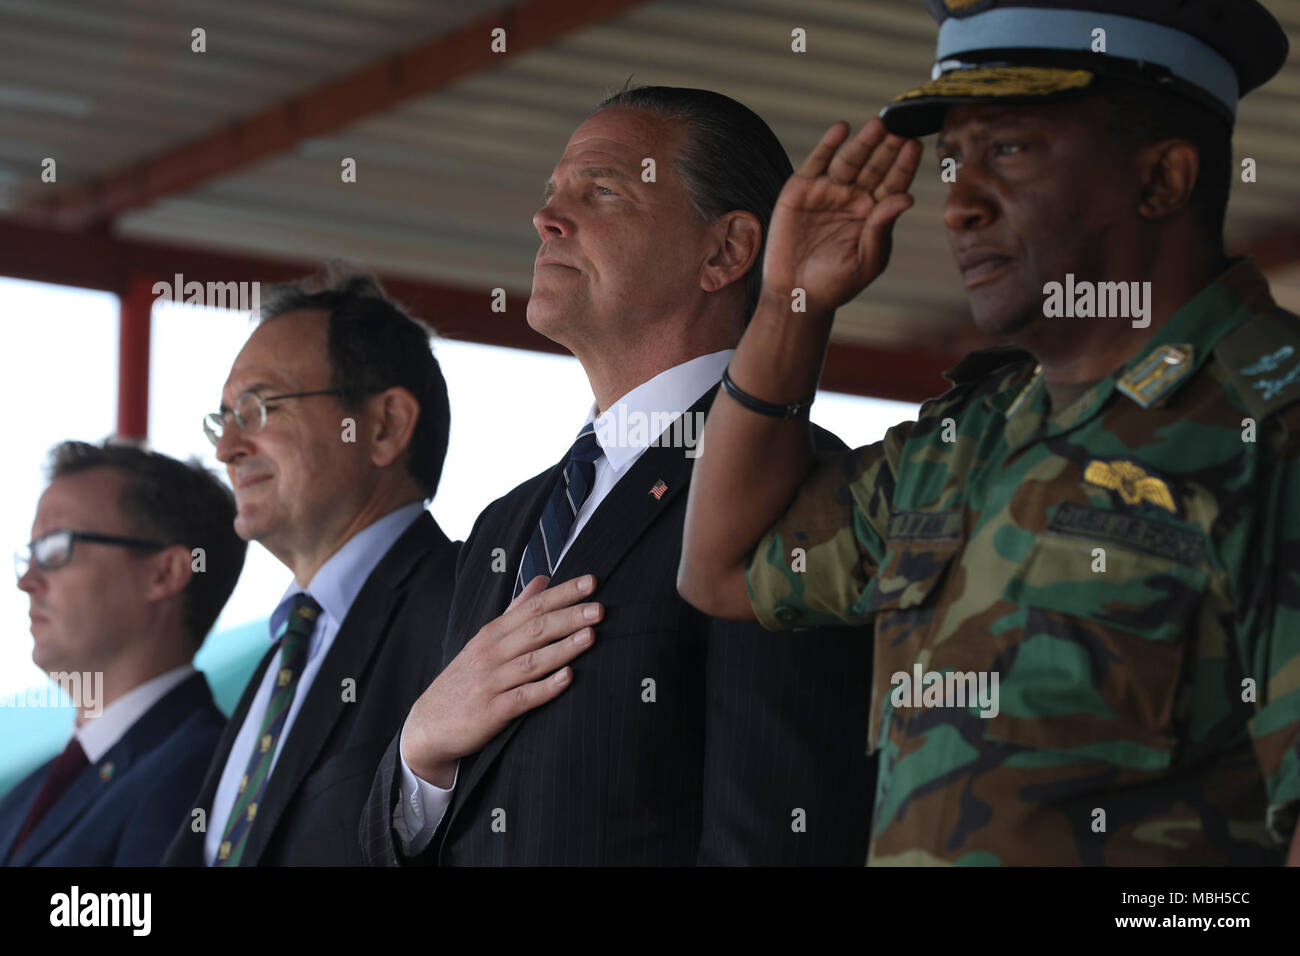 Daniel L. Foote, U.S. Ambassador to the Republic of Zambia, stands while the Zambian Army Band plays the American National Anthem during the closing ceremonies of ZAMBAT IV, Nanking Peace Mission Training Center, Lusaka, Zambia, March 29, 2018.Training modules included: marksmanship, mounted battle drills, training alongside Indian Army counterparts for battlefield trauma, cordon and search, and convoy operations with British soldiers. Zambian Infantry soldiers rehearsed tactics and real-world scenarios likely to be encountered while serving in support of the United Nations Multidimensional St Stock Photo